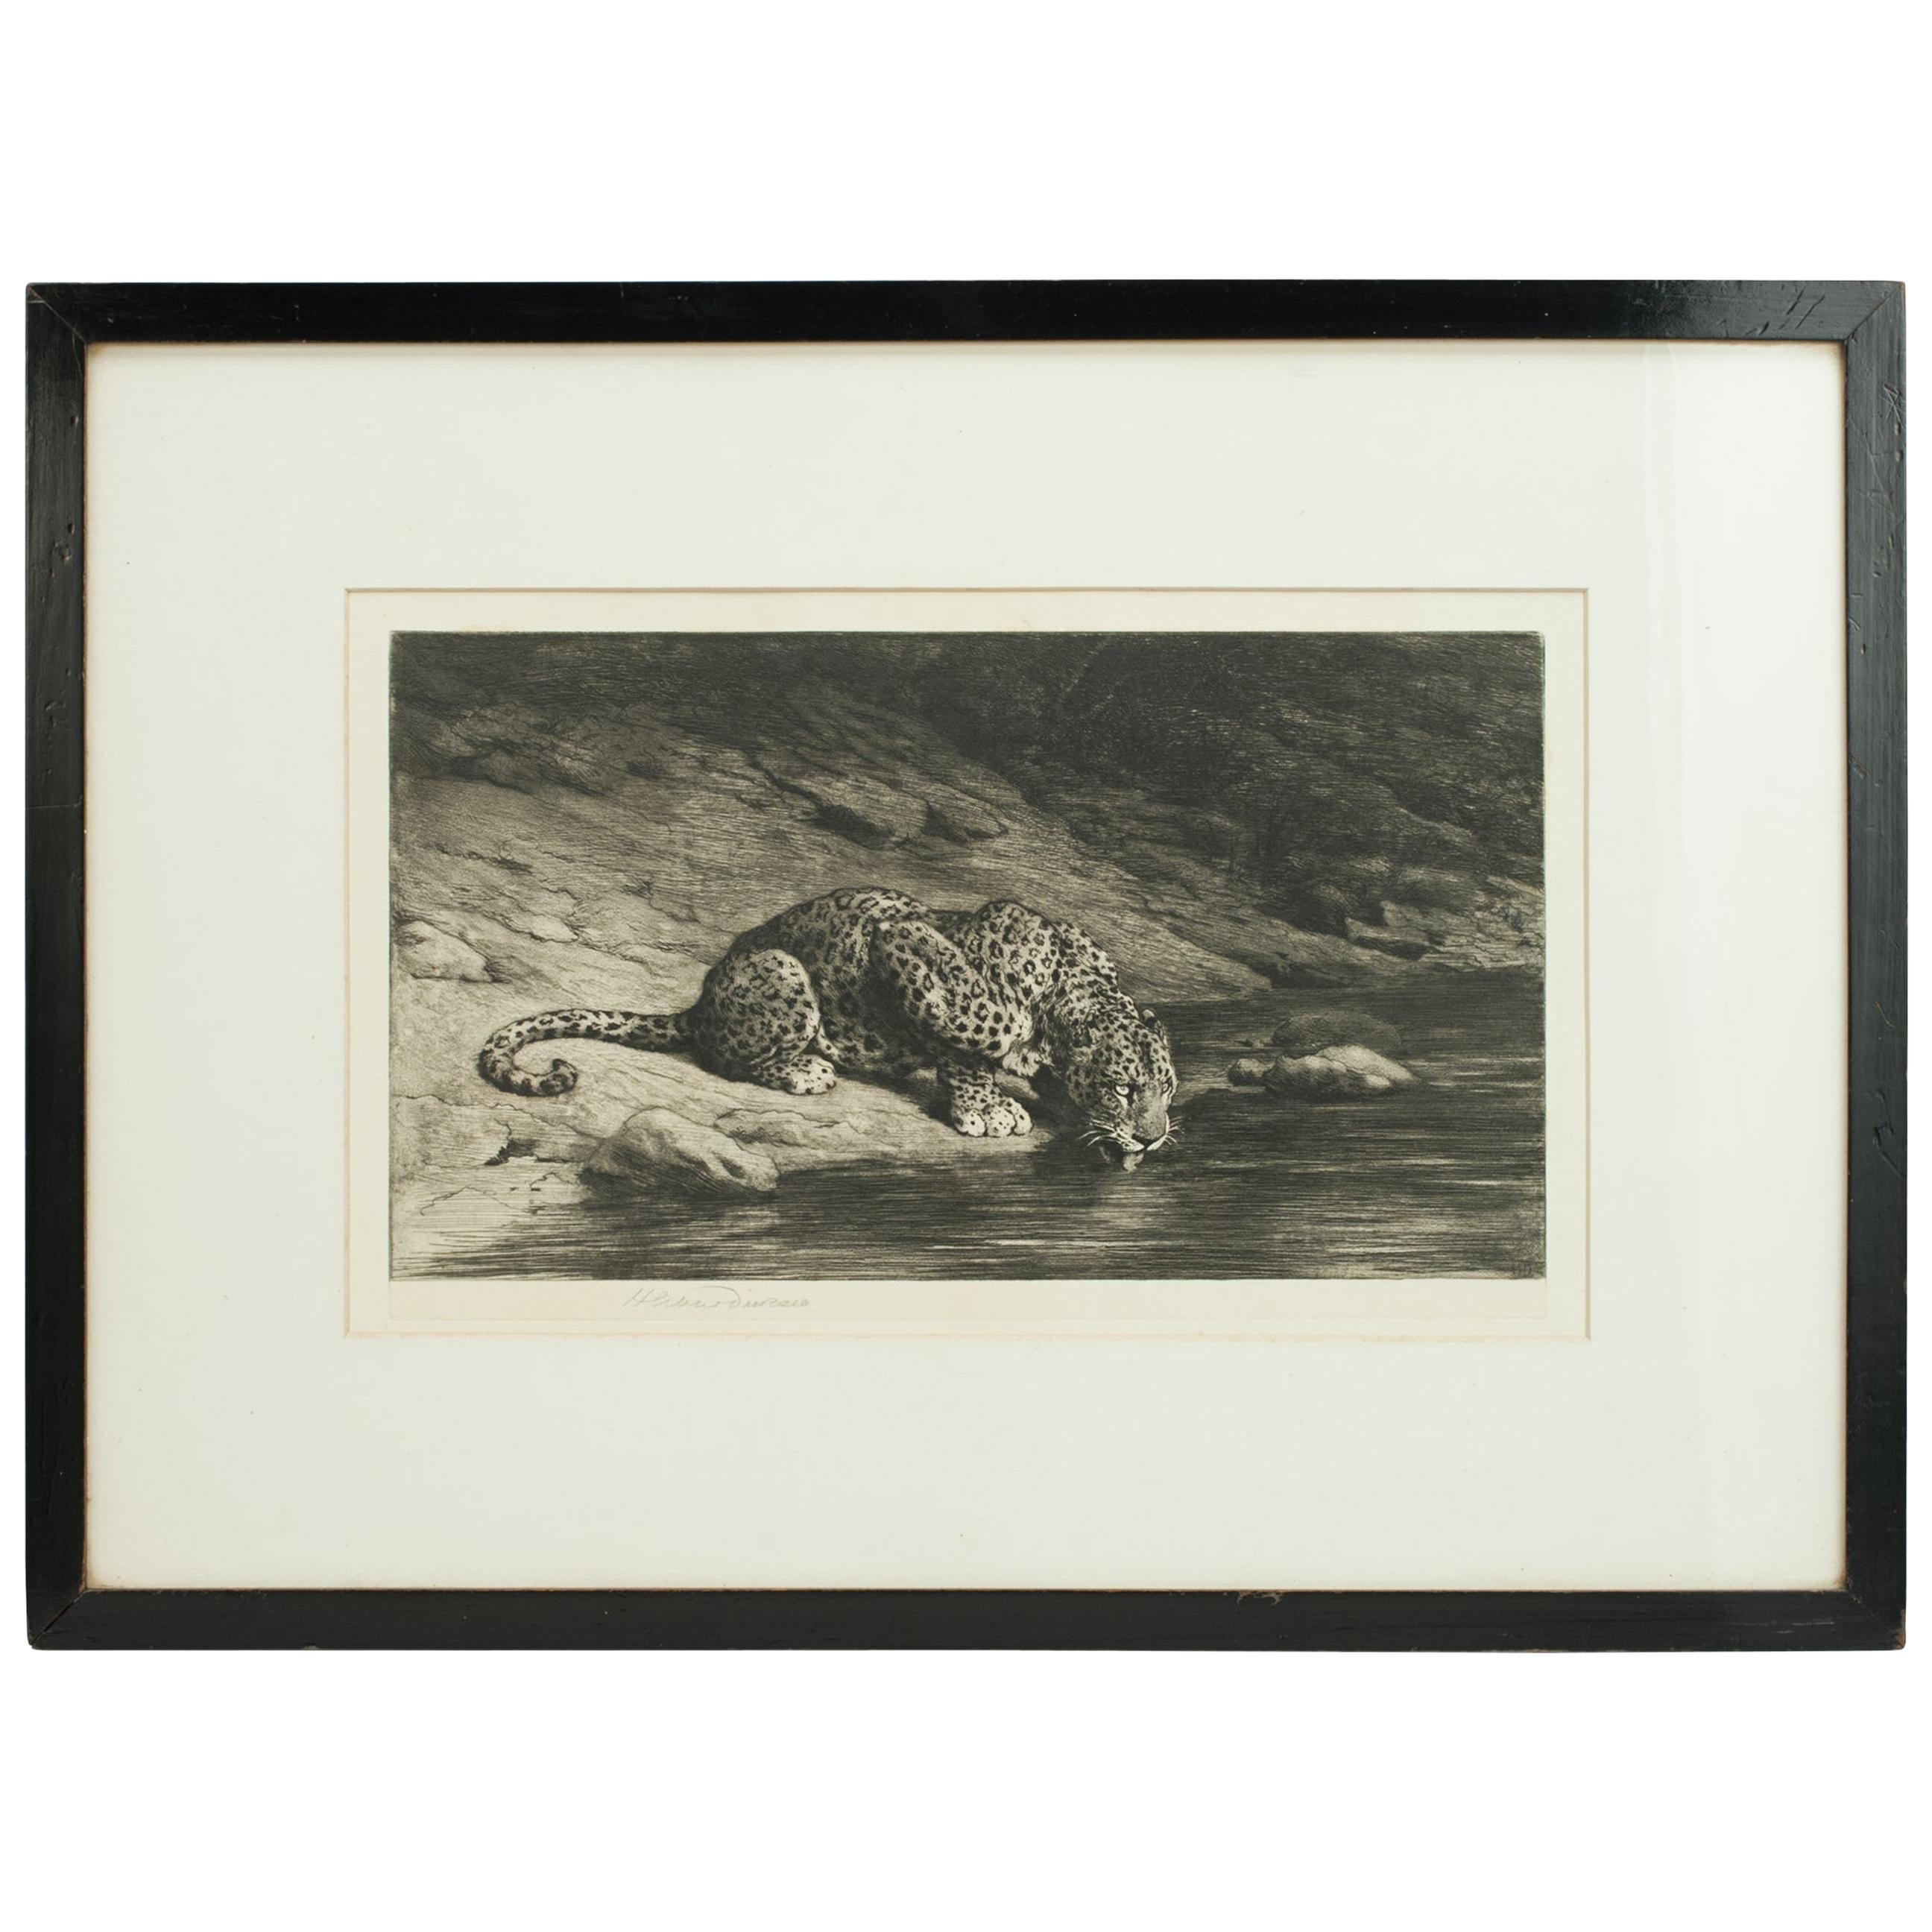 Leopard Drinking from the River by Herbert Dicksee, Drinking at the Waters Edge 